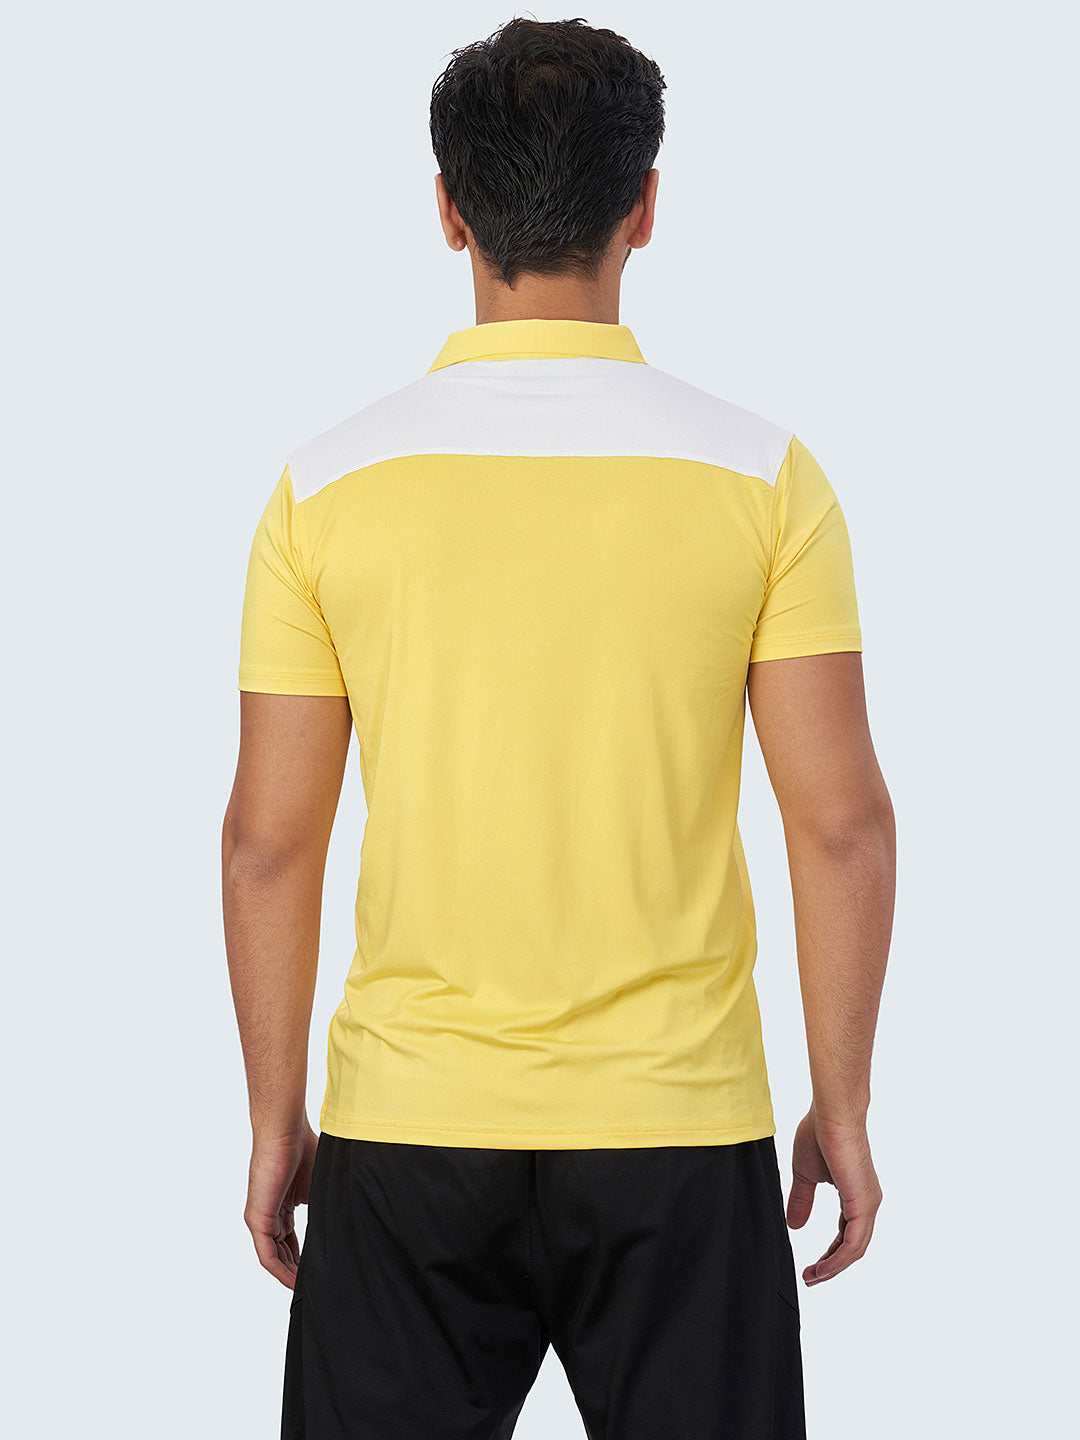 Men's Active Polo T-Shirt: Yellow - Front